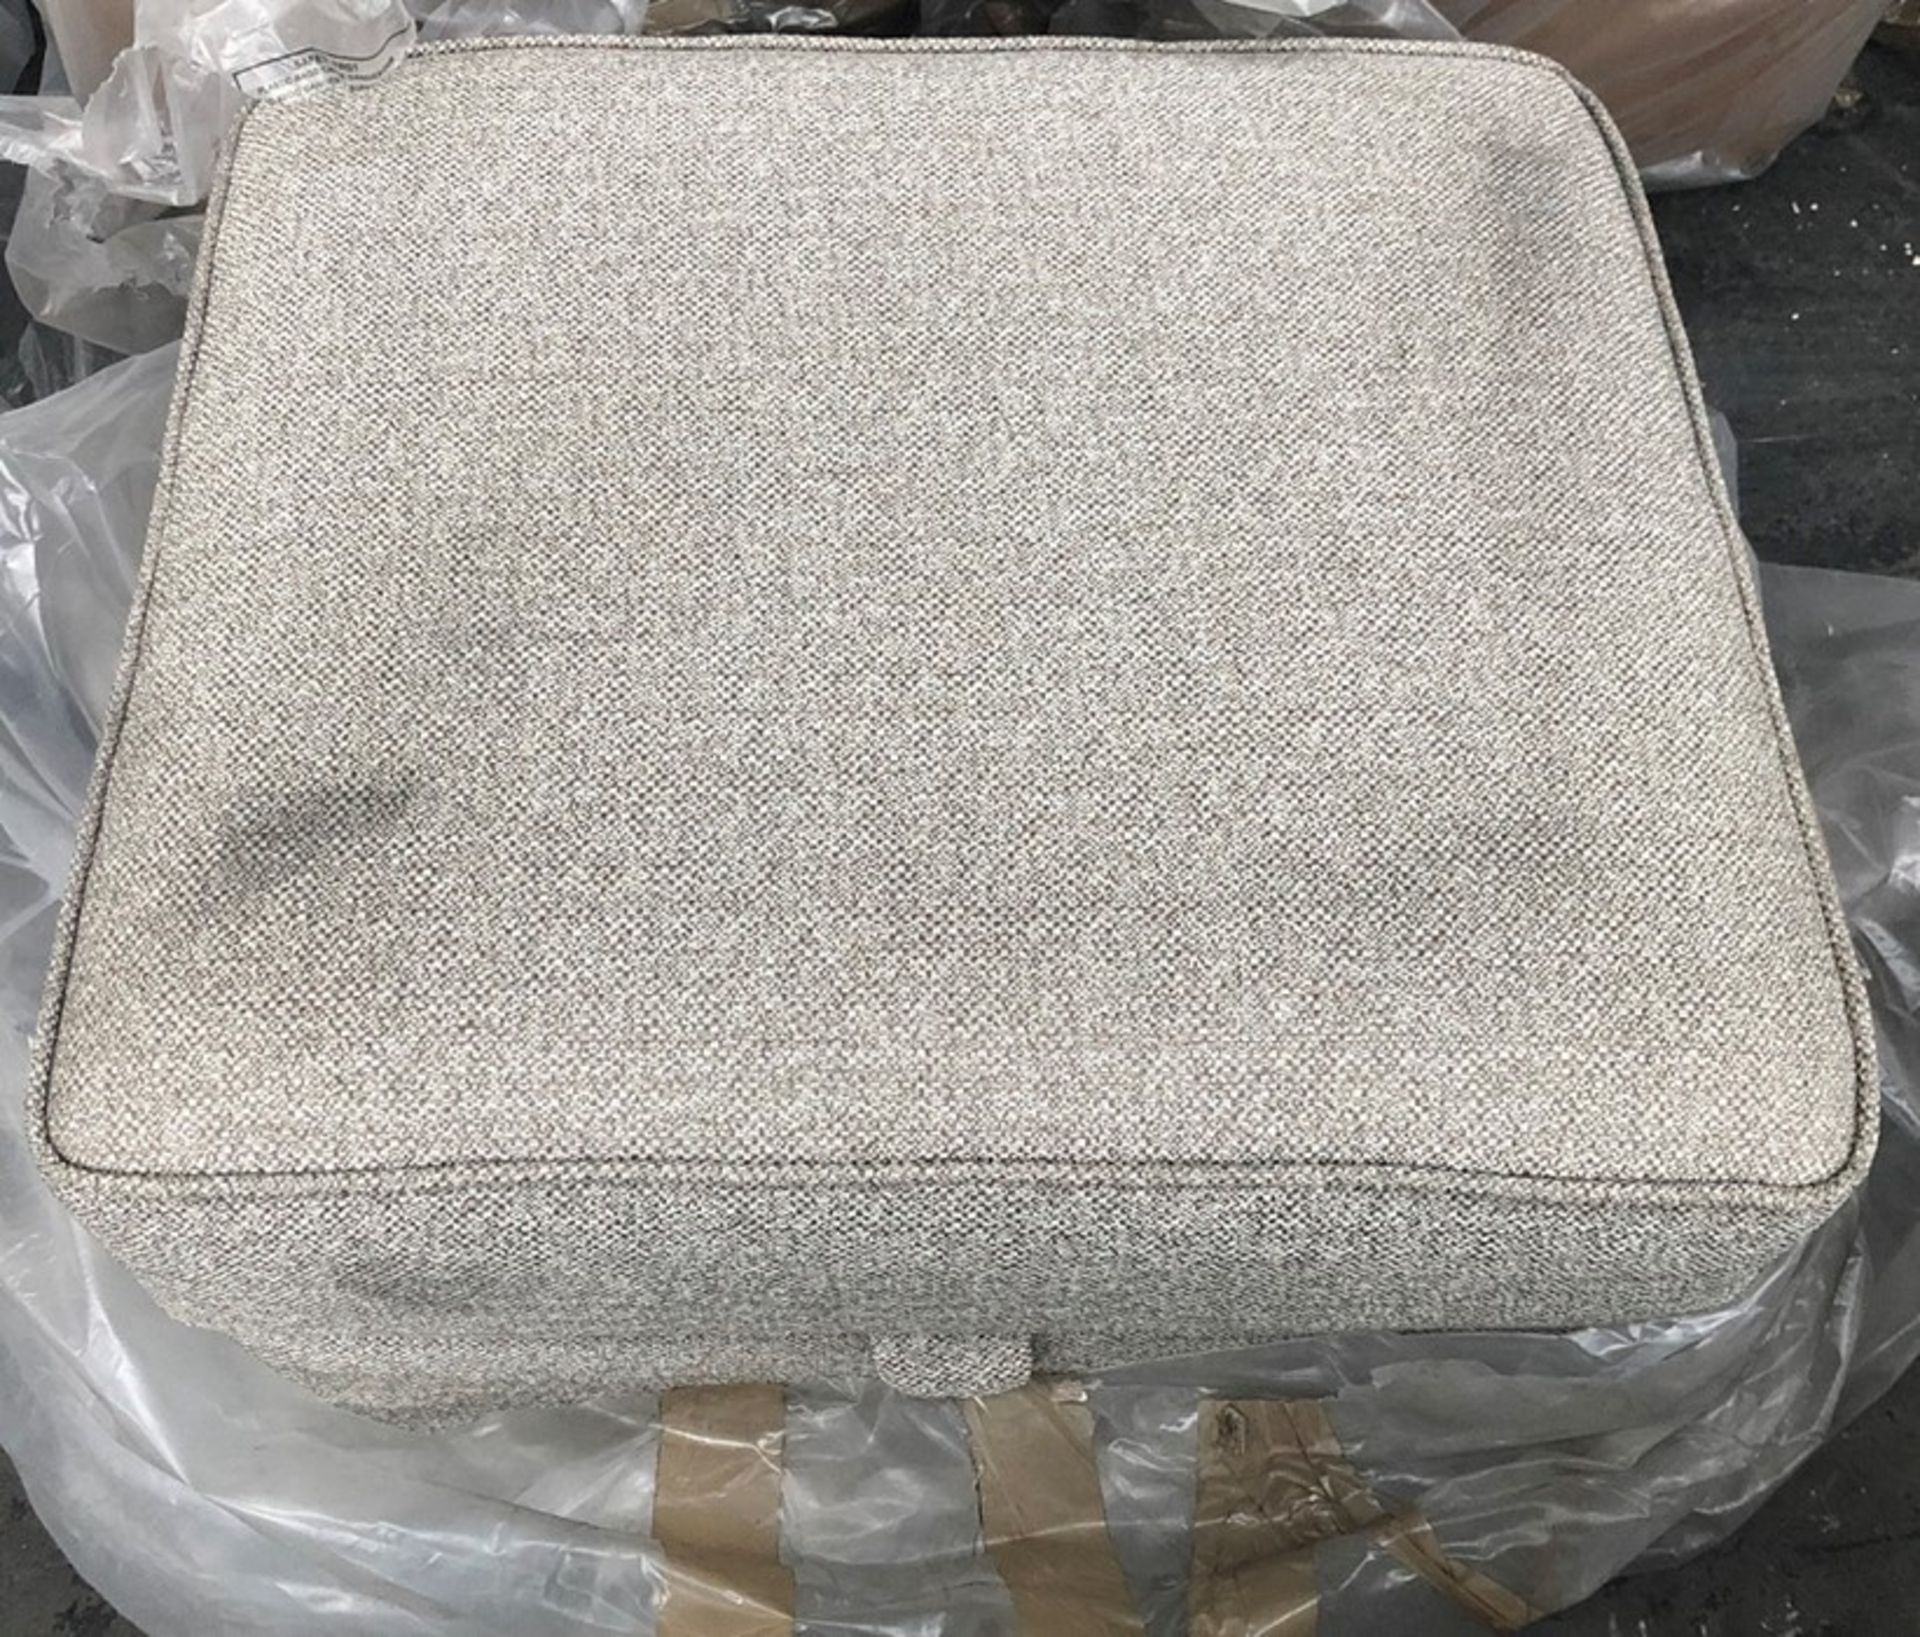 1 BRAND NEW BAGGED EDIT FOOT STOOL IN AREZZO TAUPE / NEEDS A LITTLE WIPE (VIEWING HIGHLY